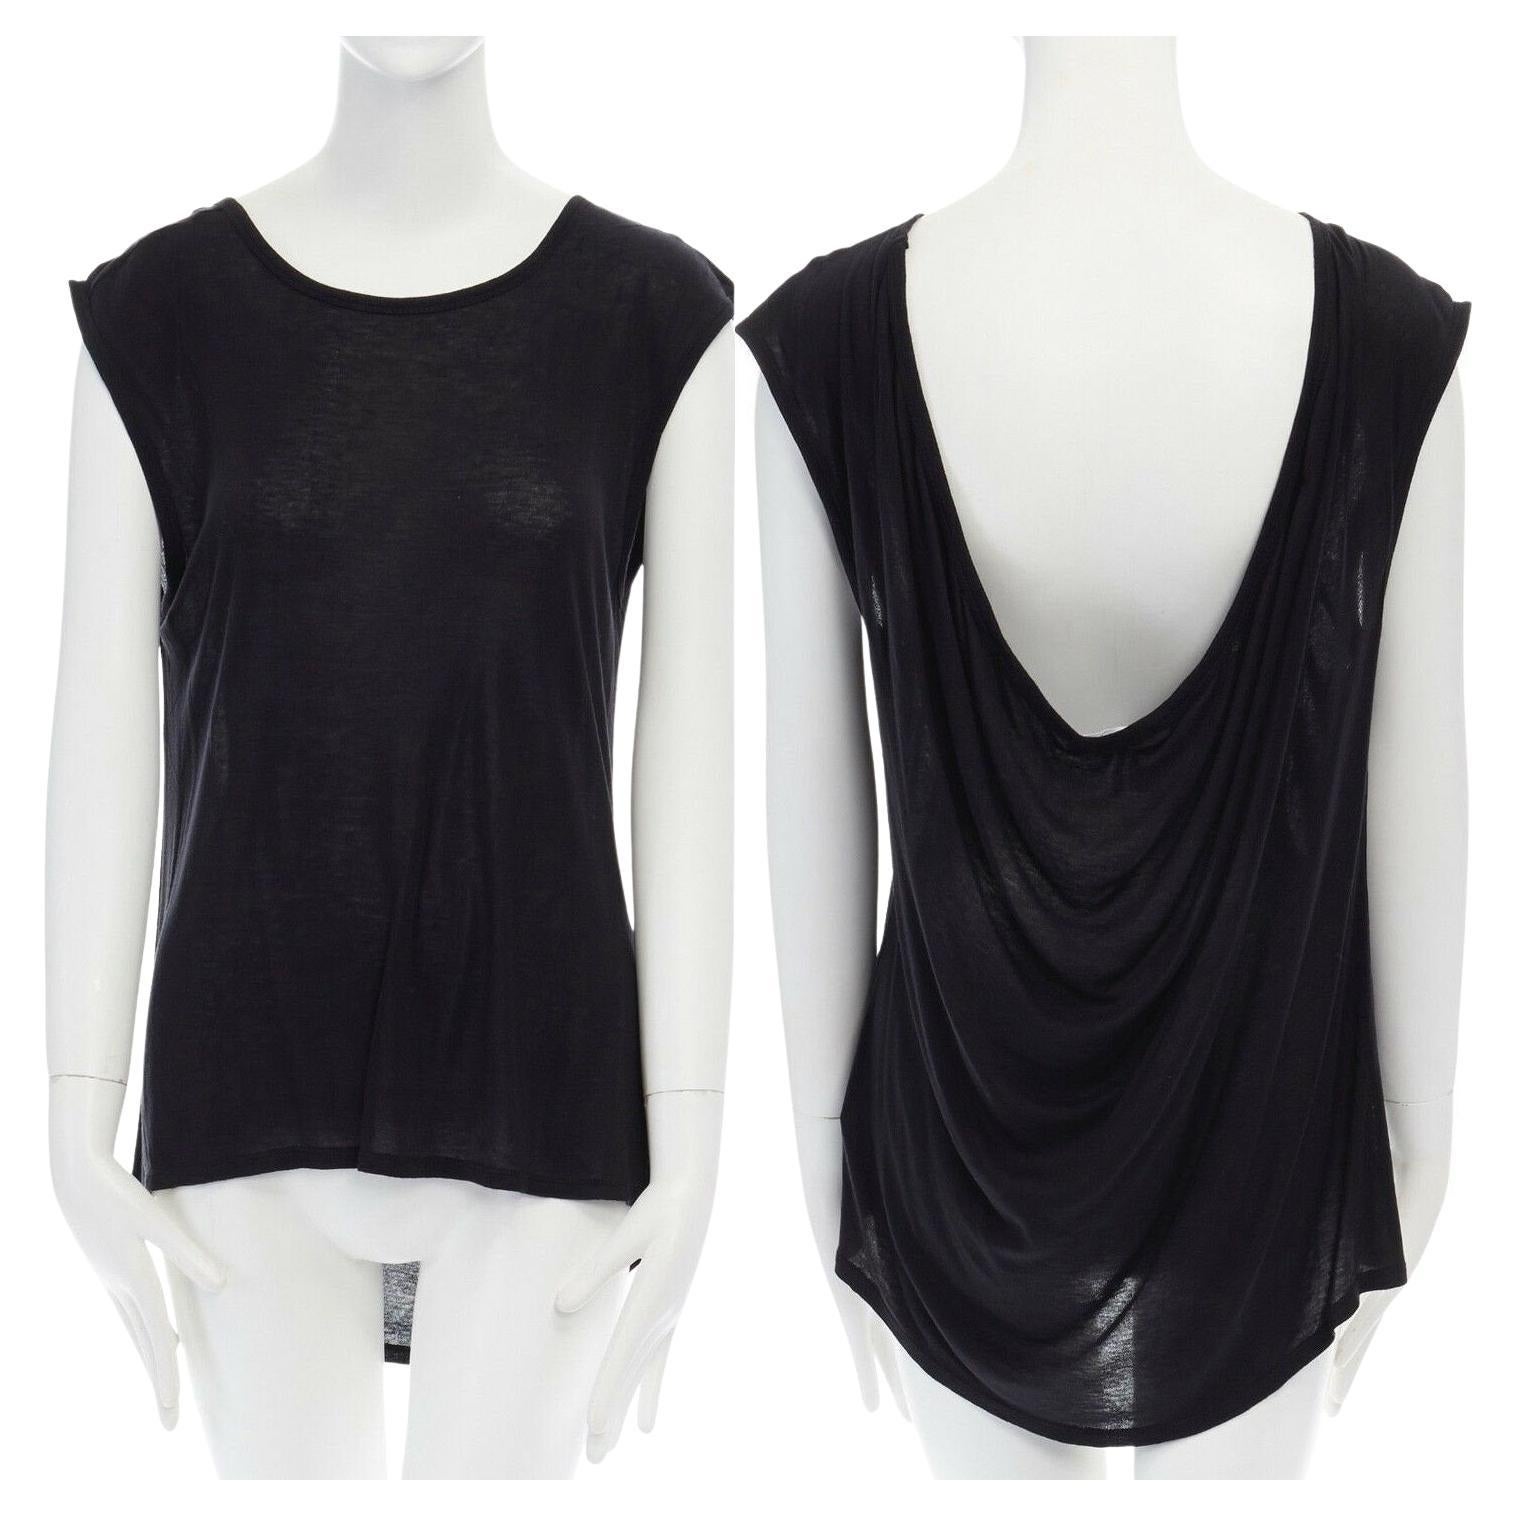 T BY ALEXANDER WANG black Tencel draped back sleeveless tank top XS 
Reference: LNKO/A00887 
Brand: Alexander Wang 
Designer: Alexander Wang 
Material: Tencel 
Color: Black 
Pattern: Solid 
Extra Detail: 100% Tencel. Black. Wide neckline.